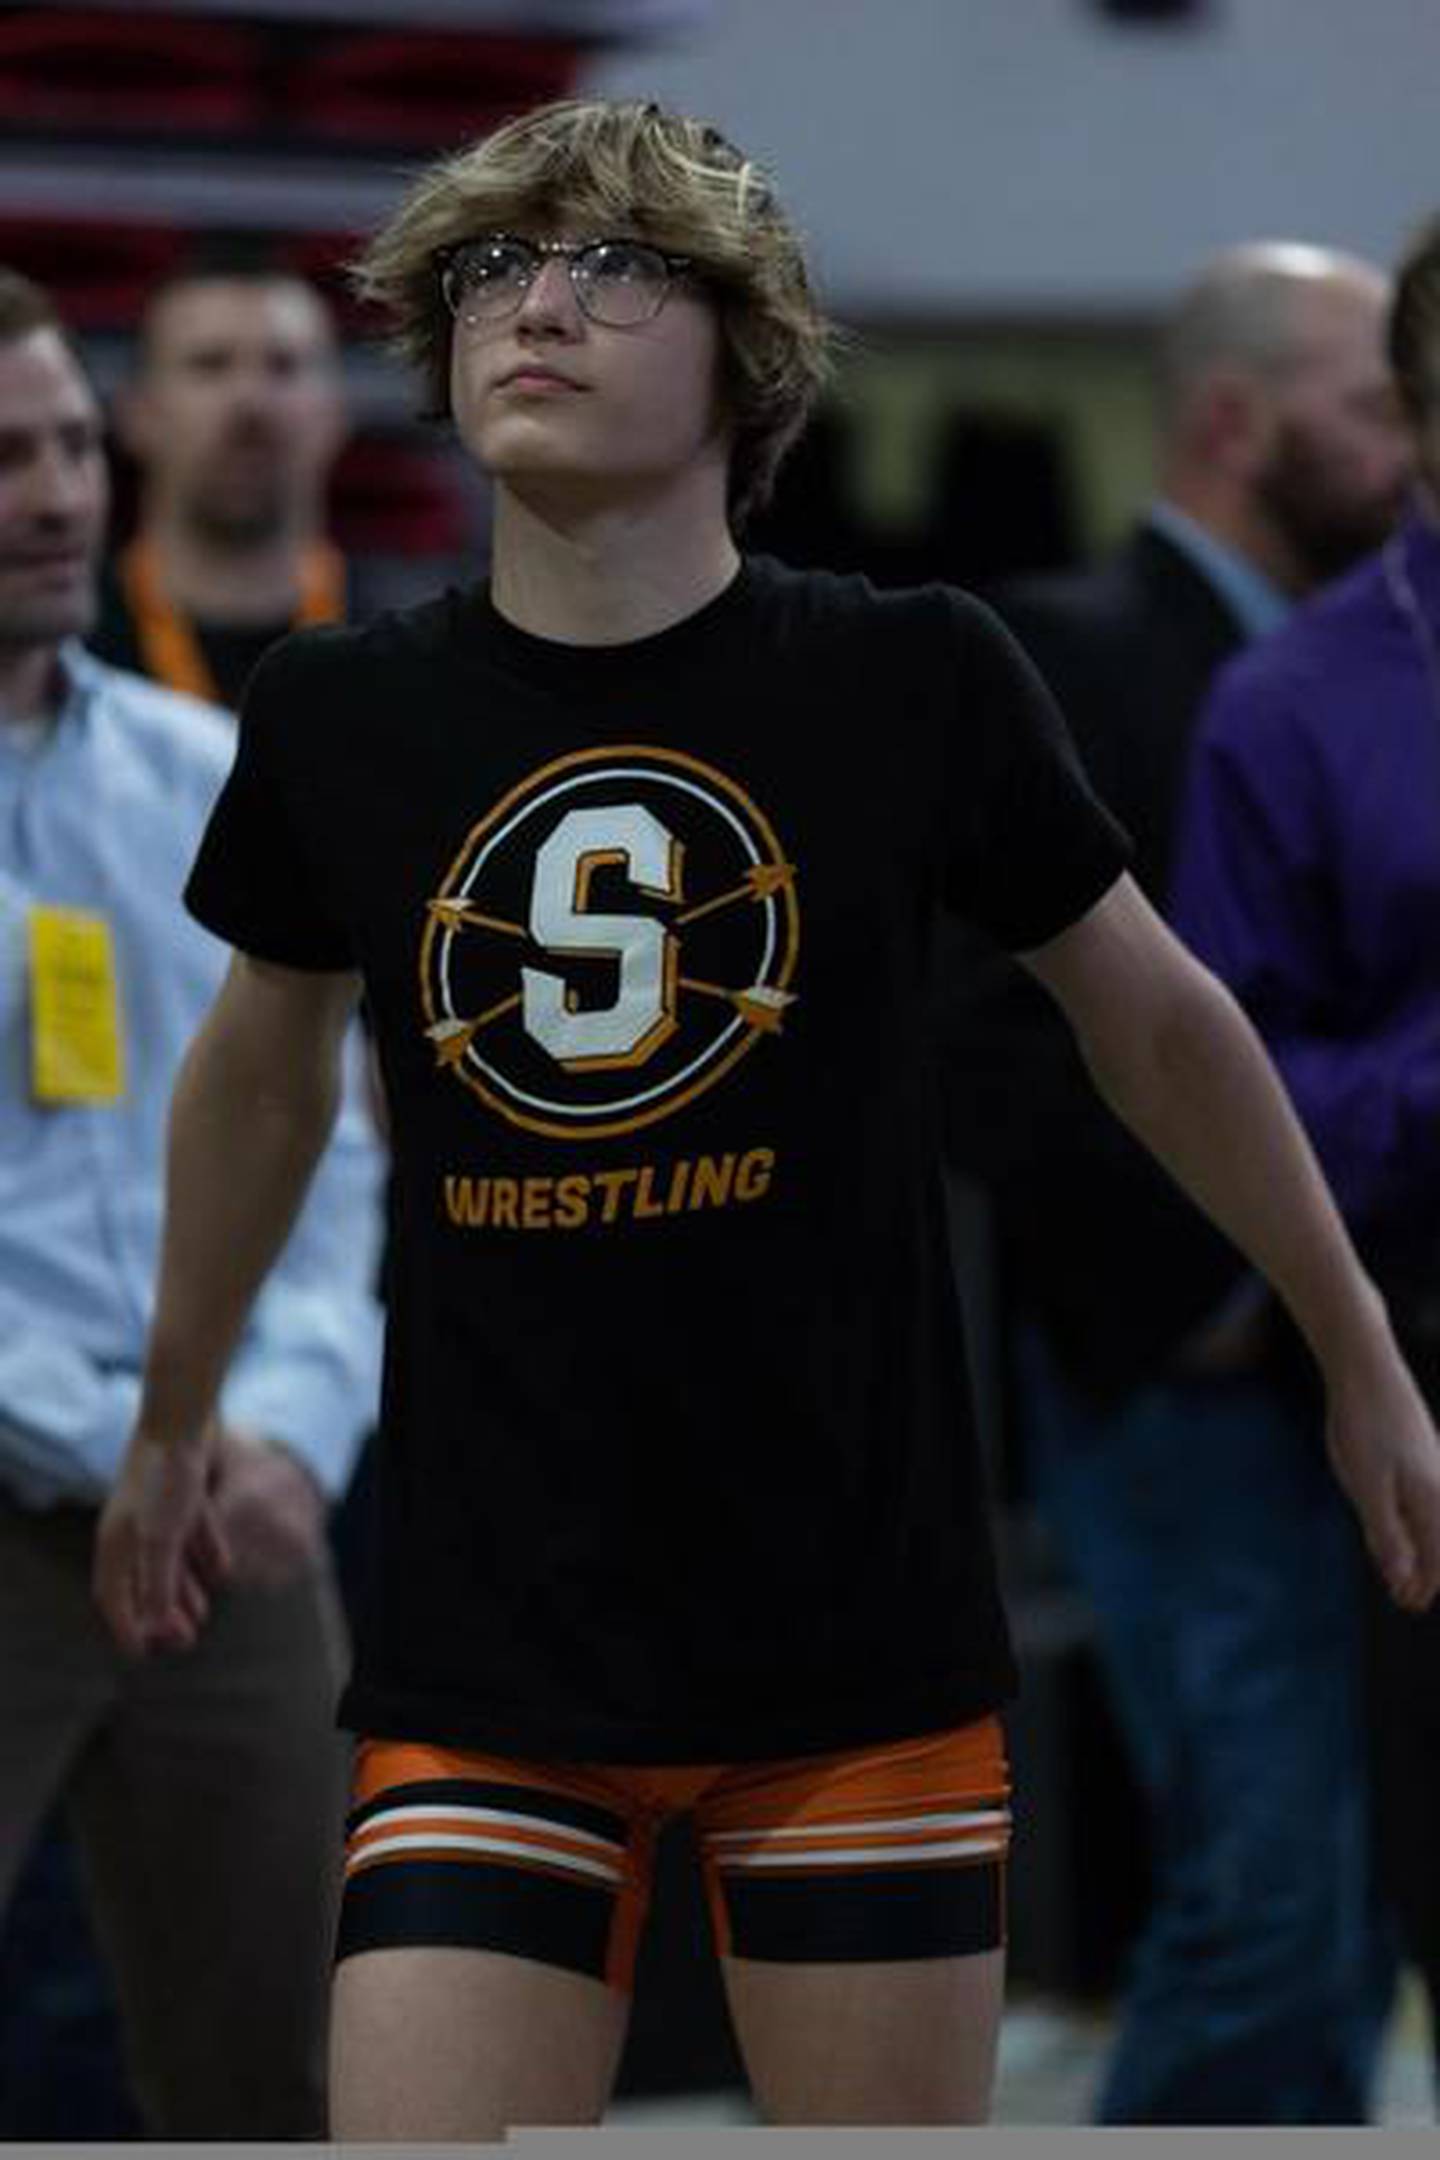 Cooper Corder competes in a recent wrestling match.